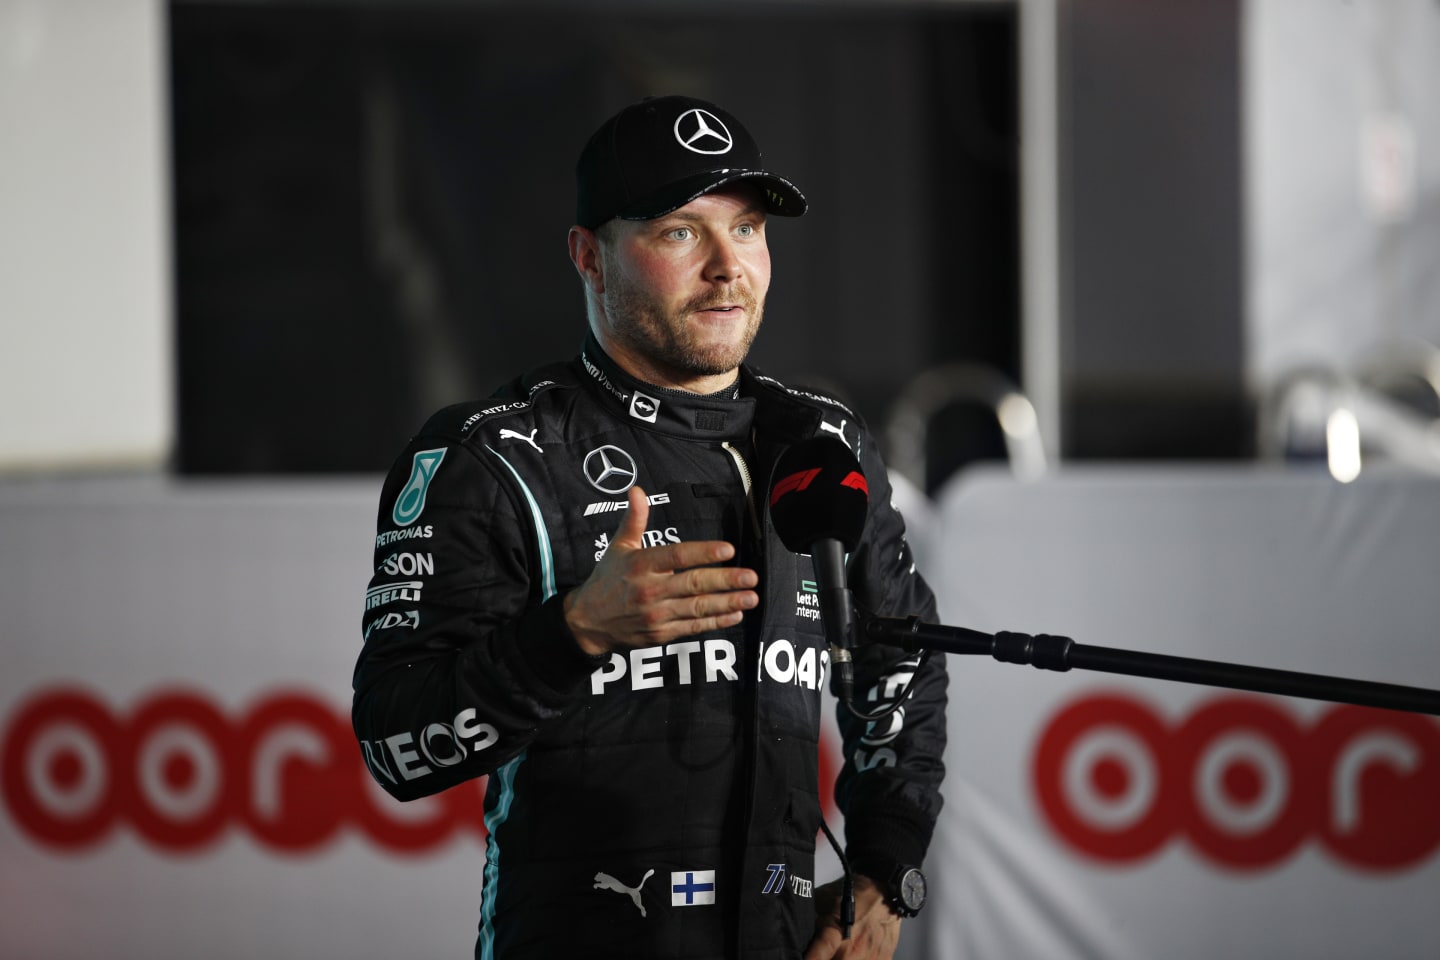 DOHA, QATAR - NOVEMBER 20: Third place qualifier Valtteri Bottas of Finland and Mercedes GP talks to the media in parc ferme during qualifying ahead of the F1 Grand Prix of Qatar at Losail International Circuit on November 20, 2021 in Doha, Qatar. (Photo by Hamad I Mohammed - Pool/Getty Images)